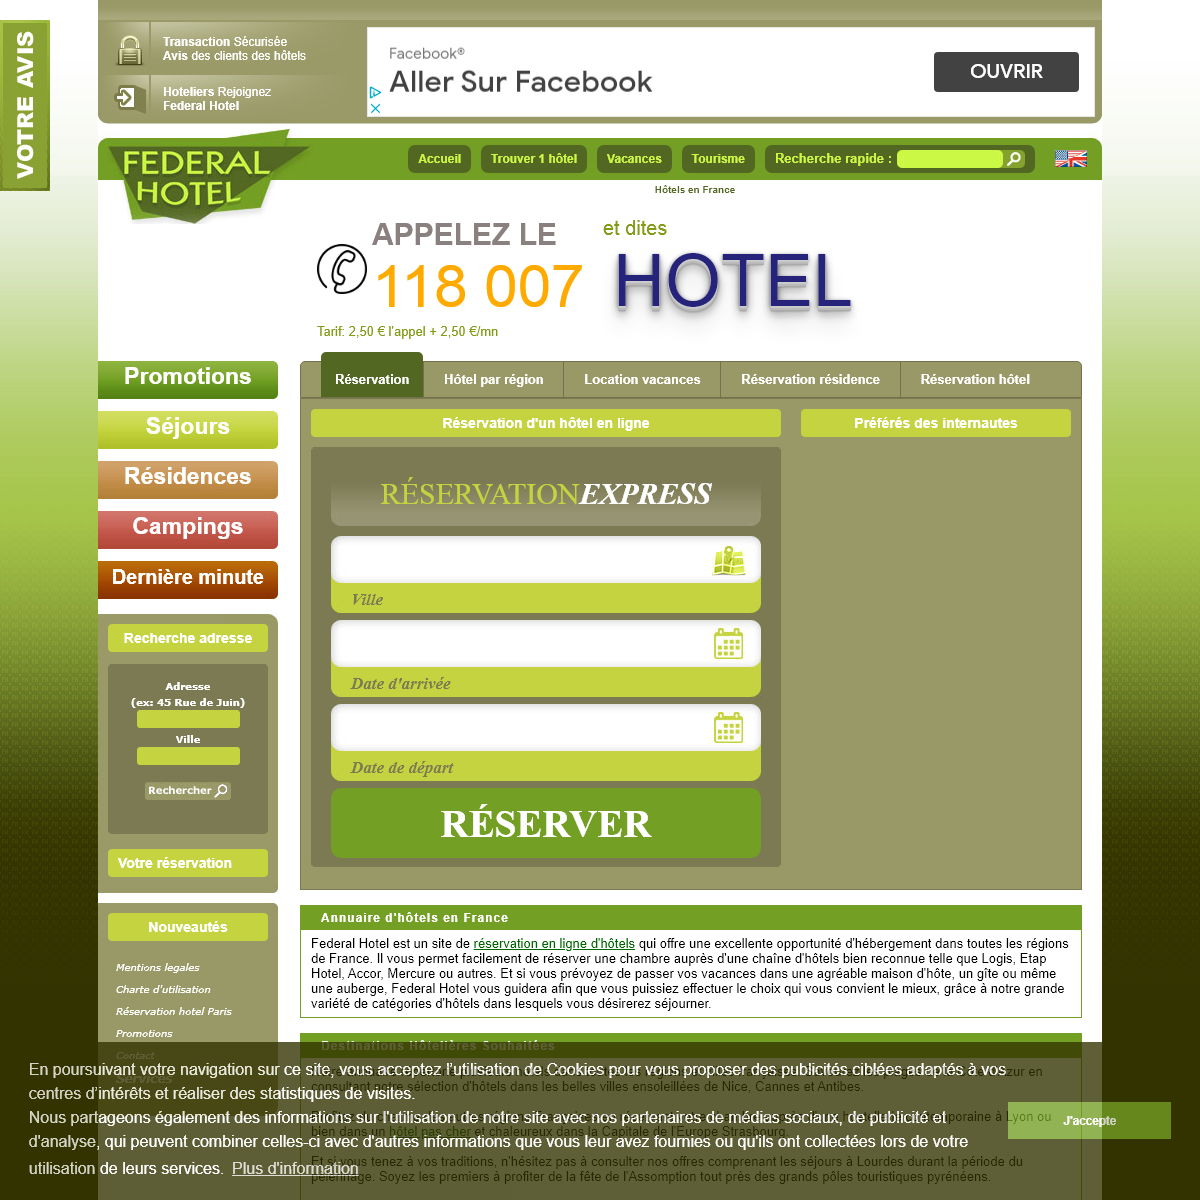 A complete backup of federal-hotel.com